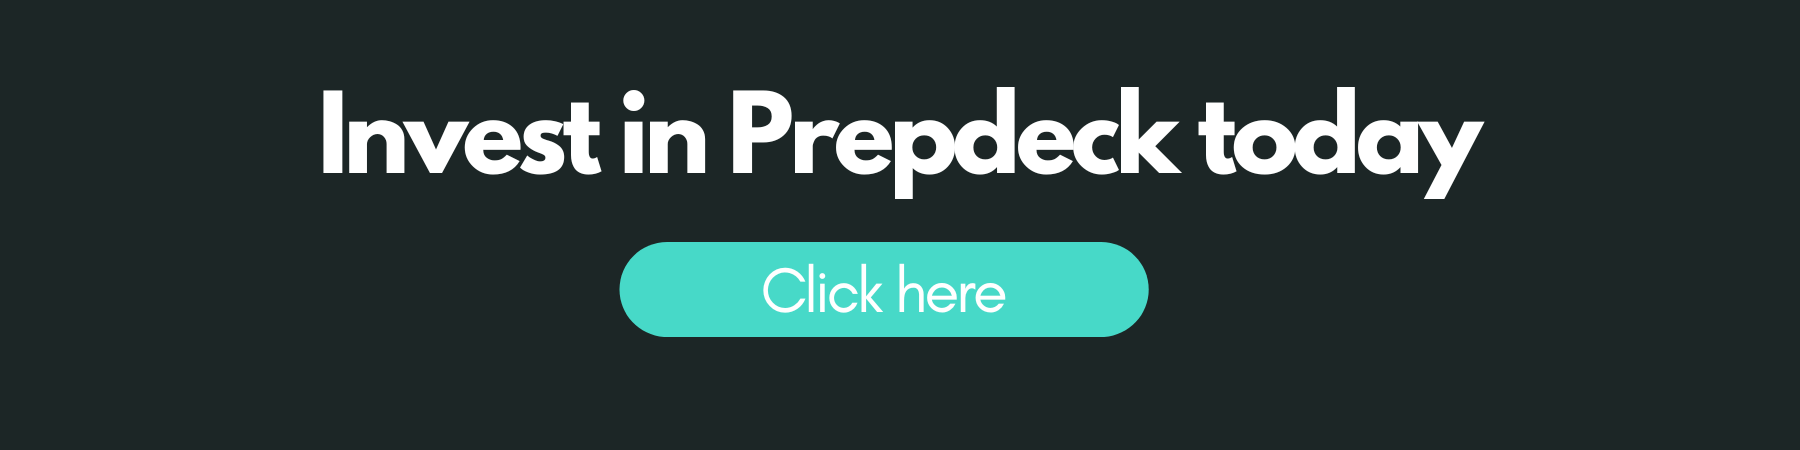 Invest in Prepdeck and join the cooking revolution!